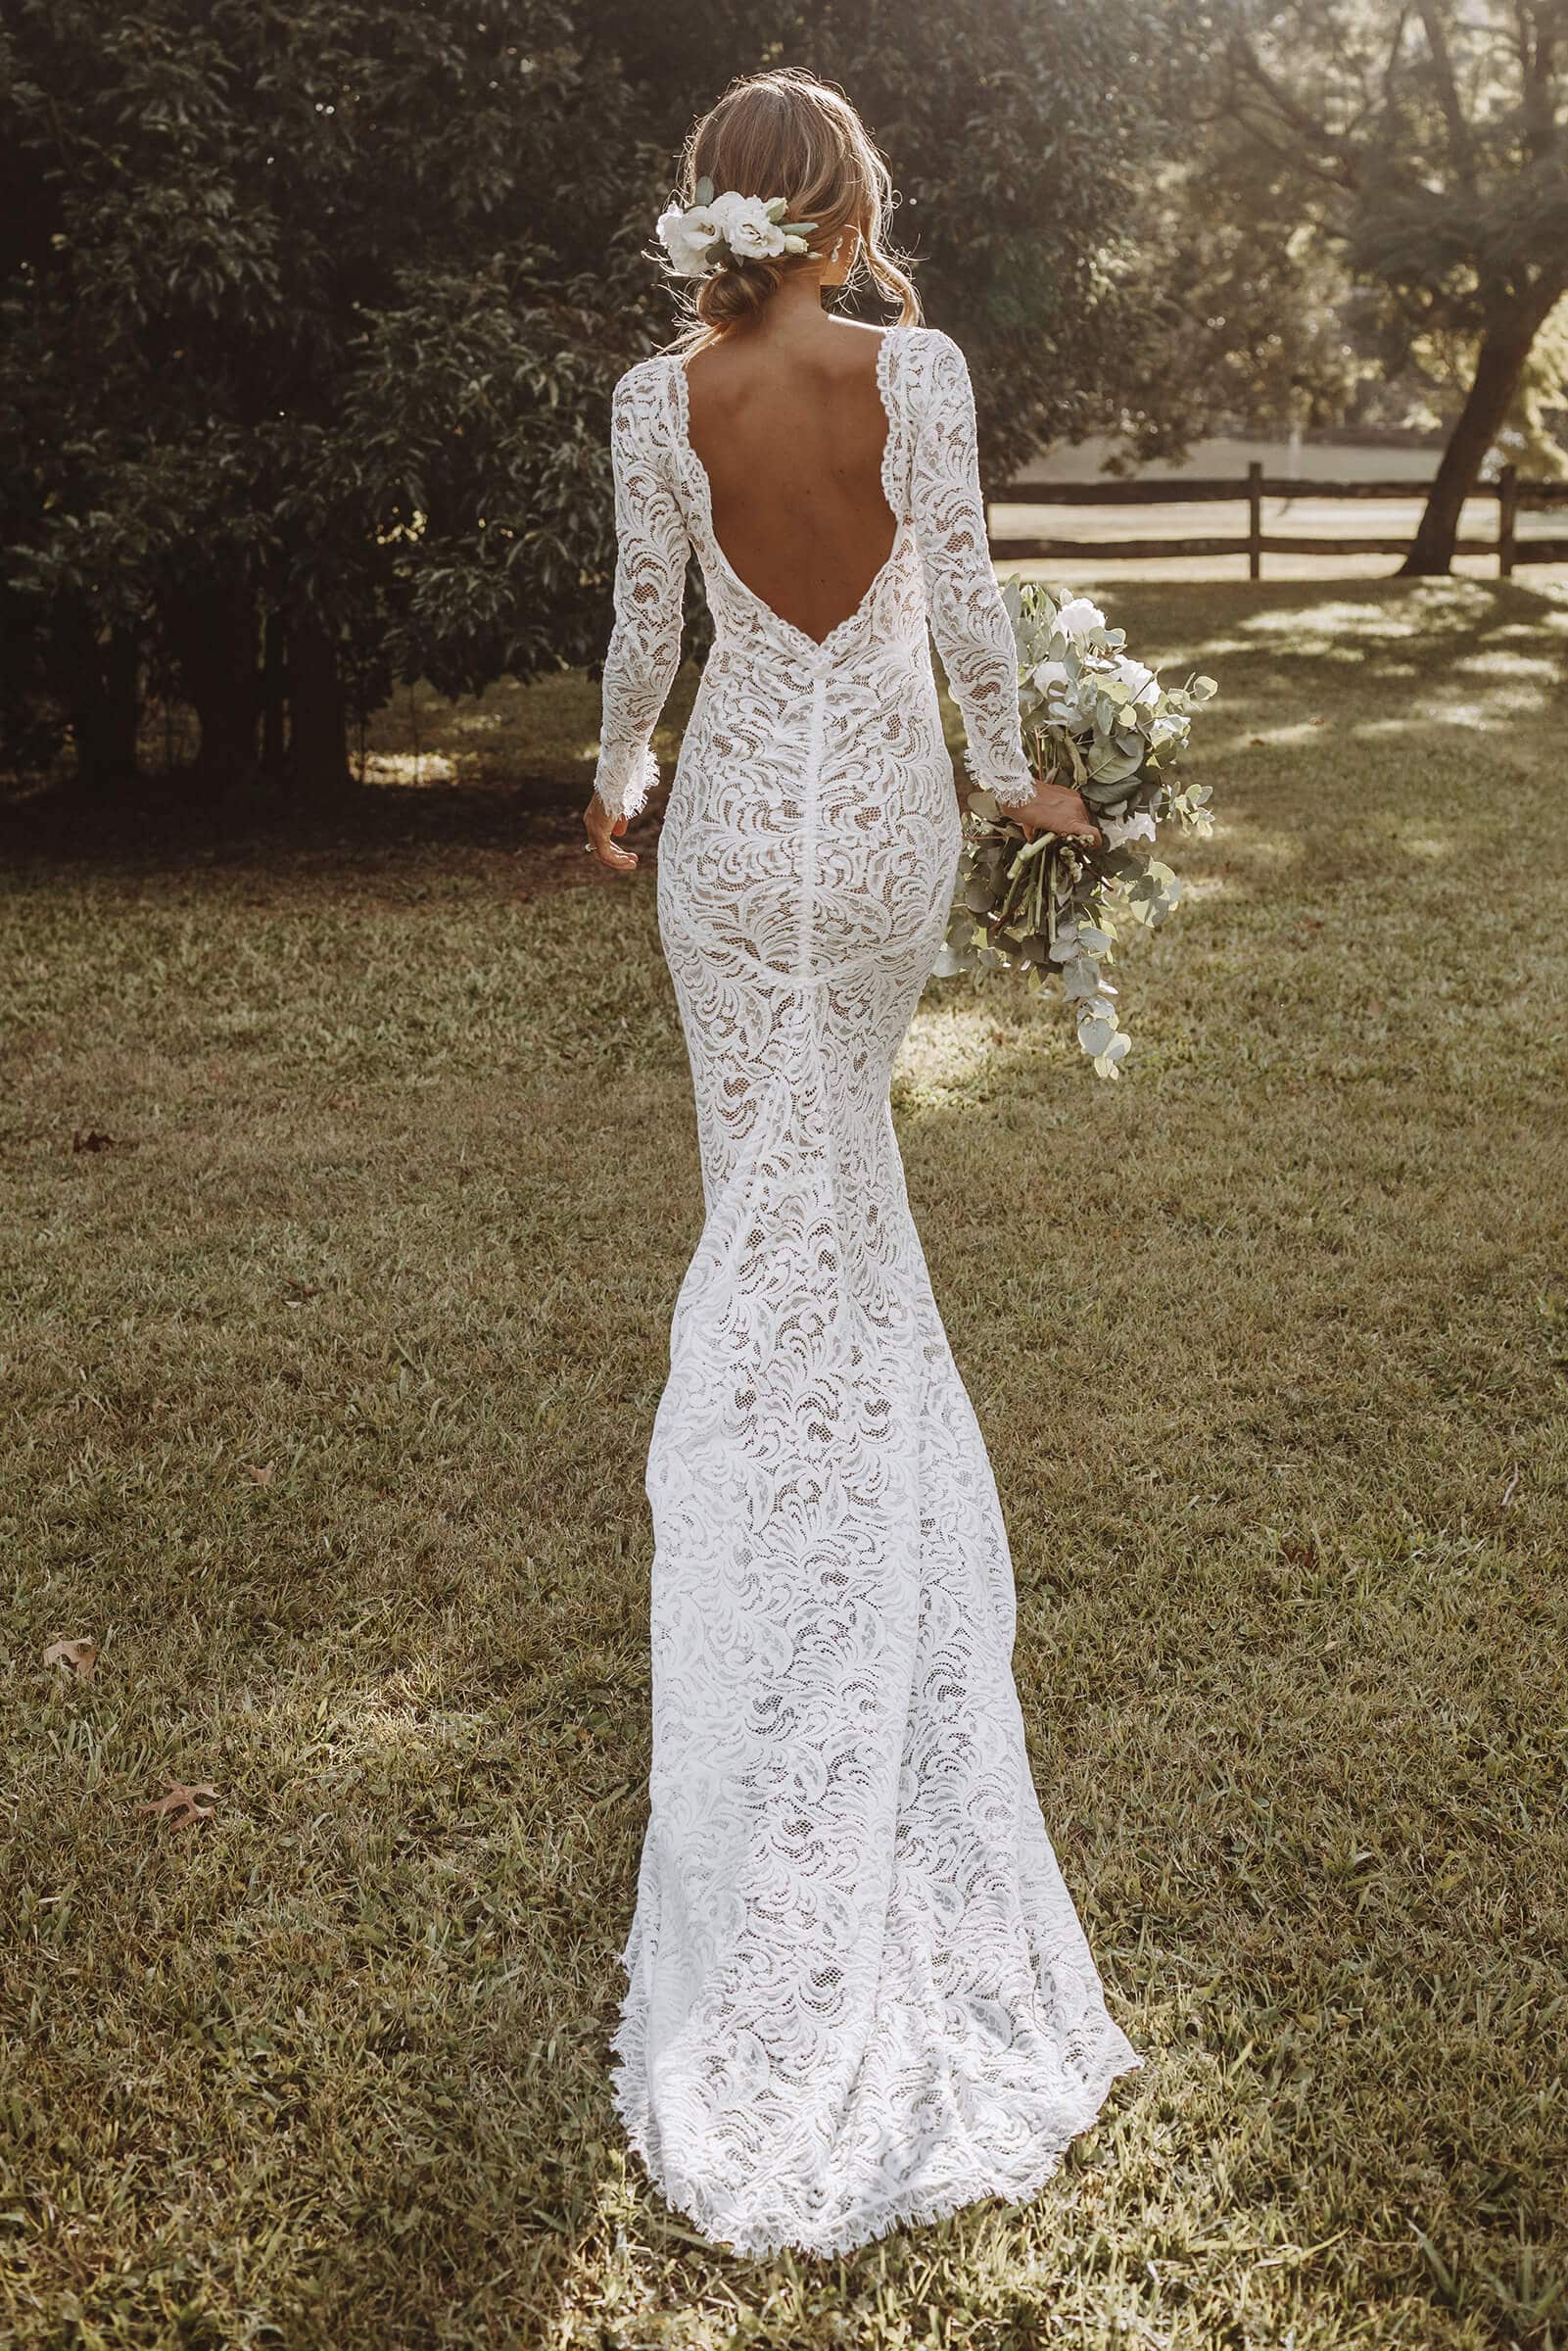 Lace Wedding Dress with Delicate Detailing